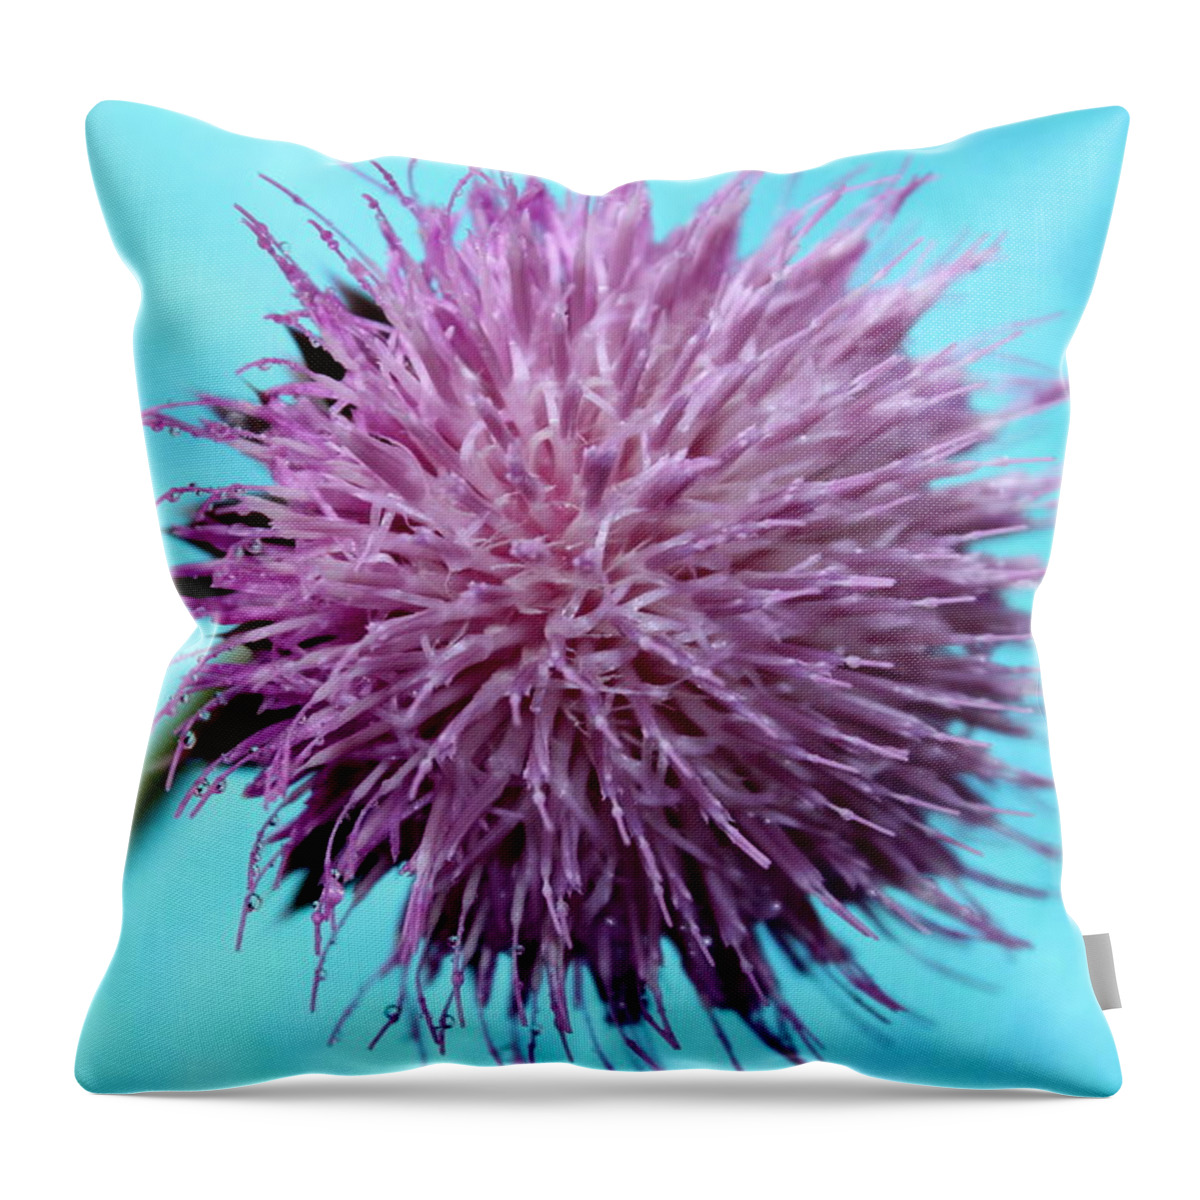 Thistle Throw Pillow featuring the photograph Peaceful Memories by Krissy Katsimbras